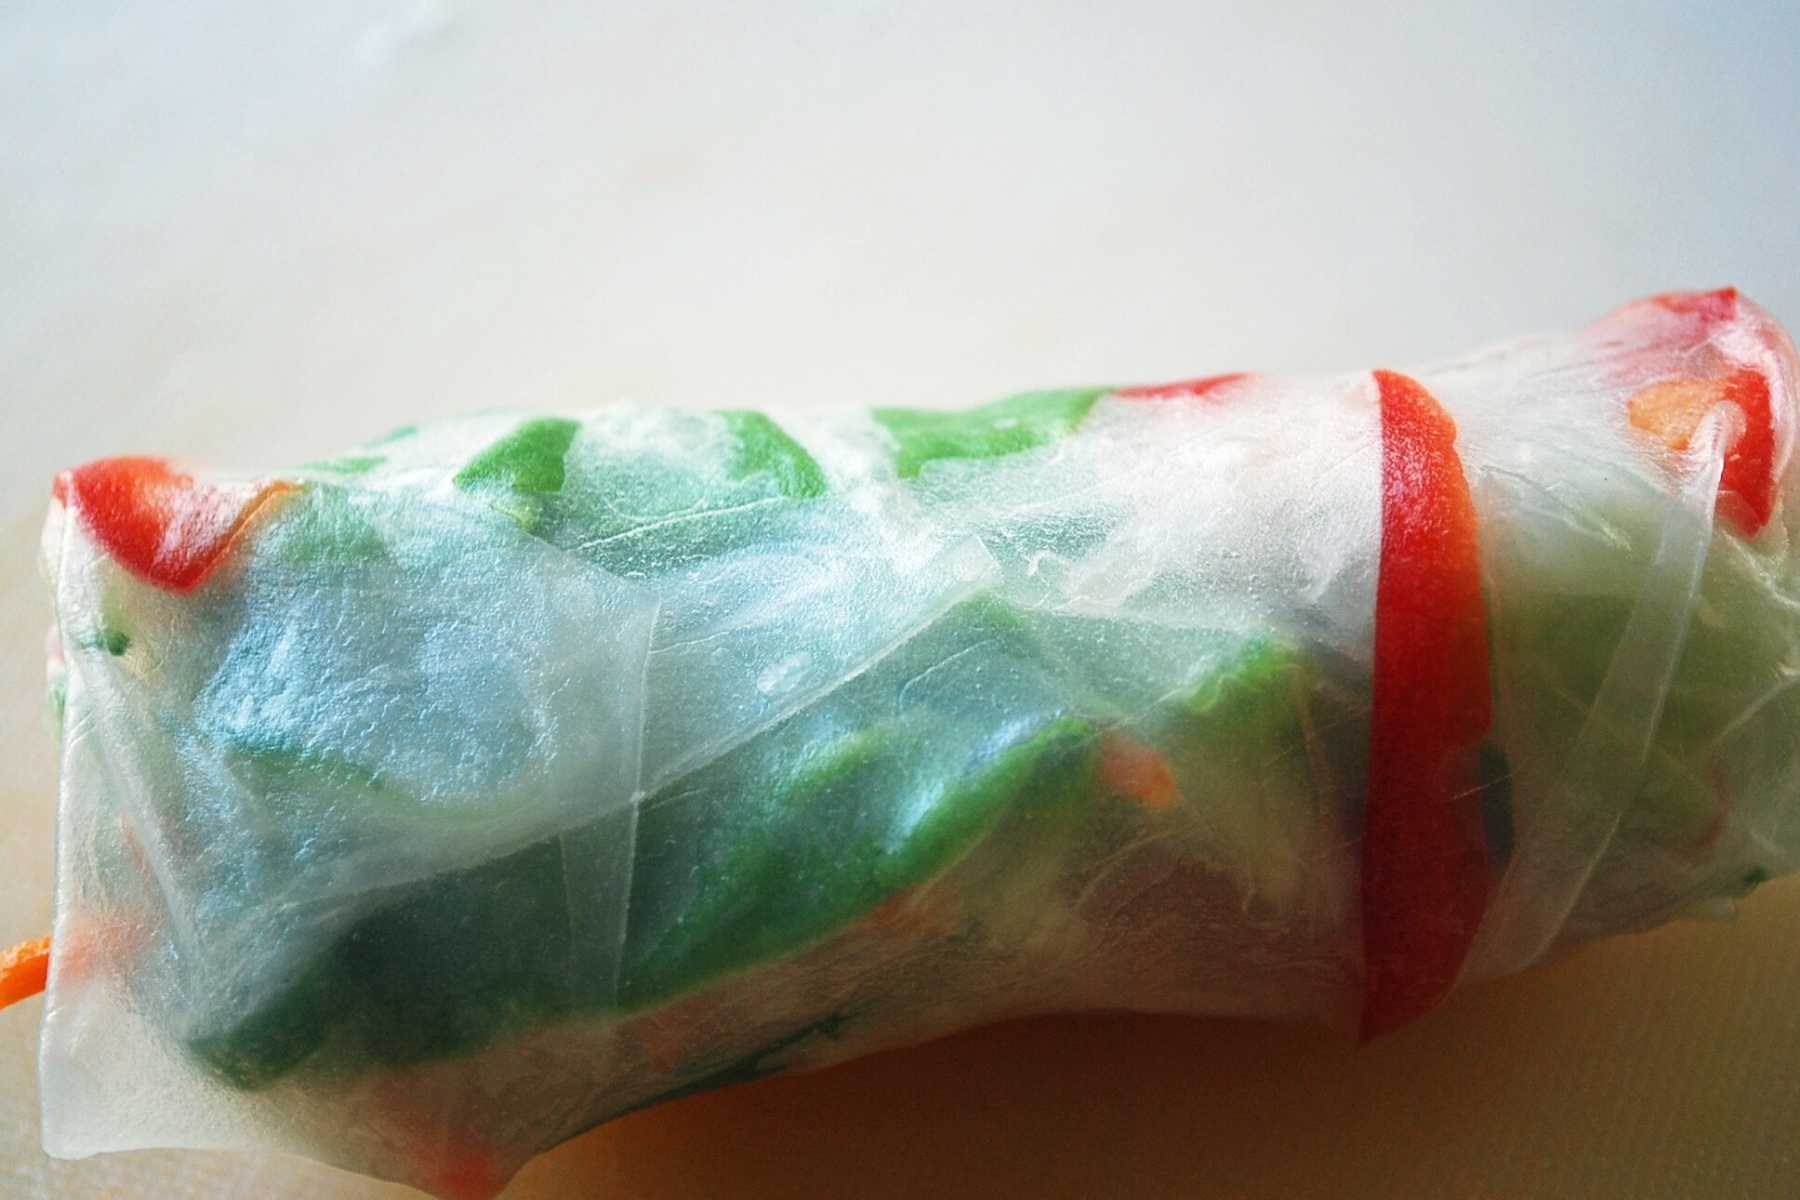 rolled up rice paper with vegetables inside